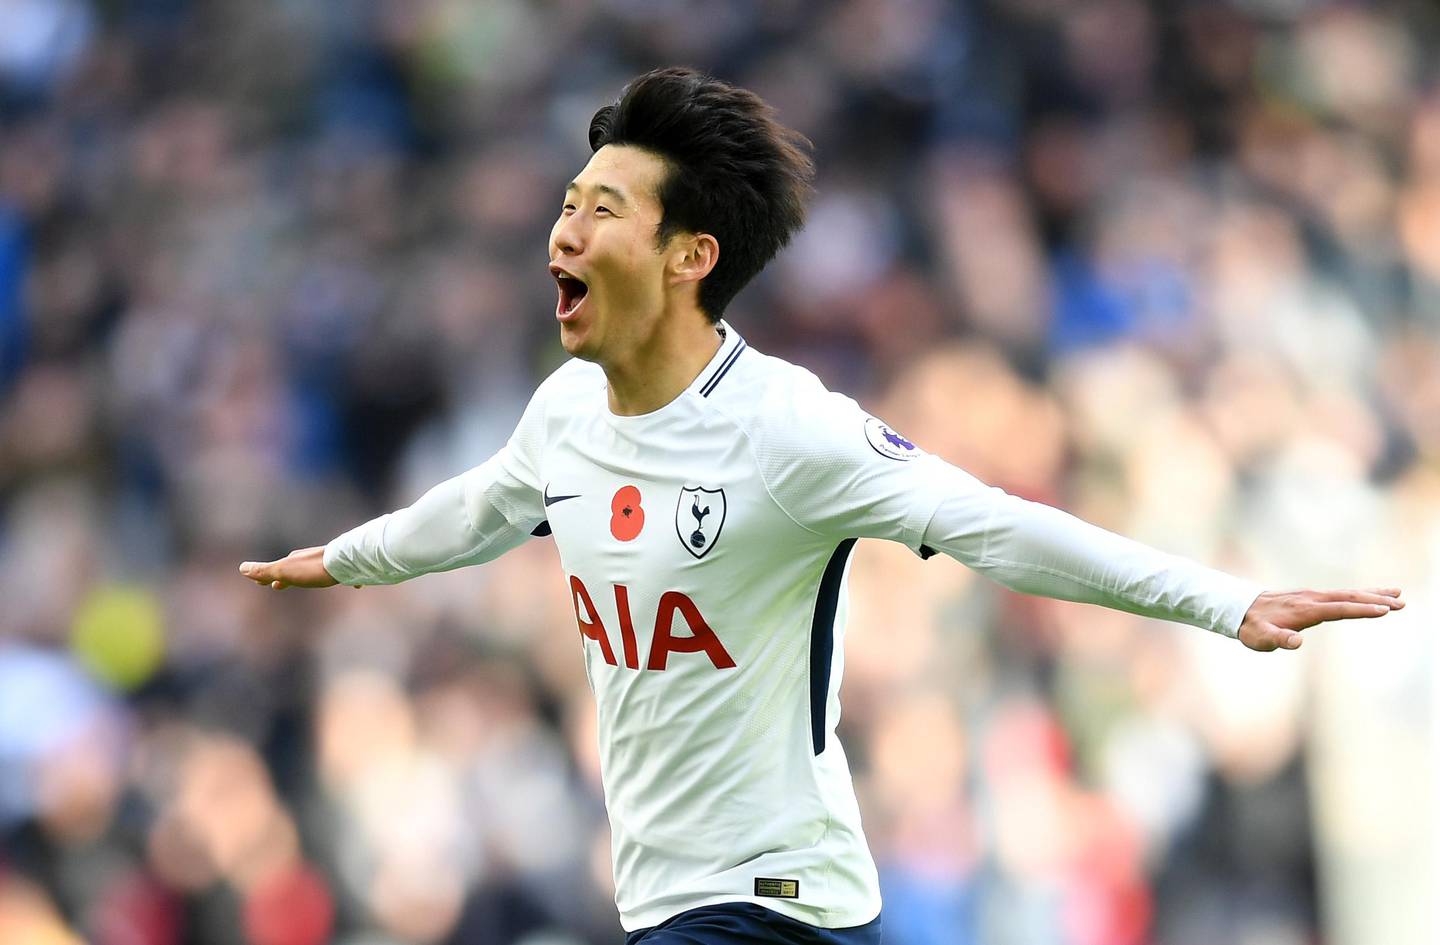 LONDON, ENGLAND - NOVEMBER 05:  Heung-Min Son of Tottenham Hotspur celebrates scoring his sides first goal during the Premier League match between Tottenham Hotspur and Crystal Palace at Wembley Stadium on November 5, 2017 in London, England.  (Photo by Michael Regan/Getty Images)